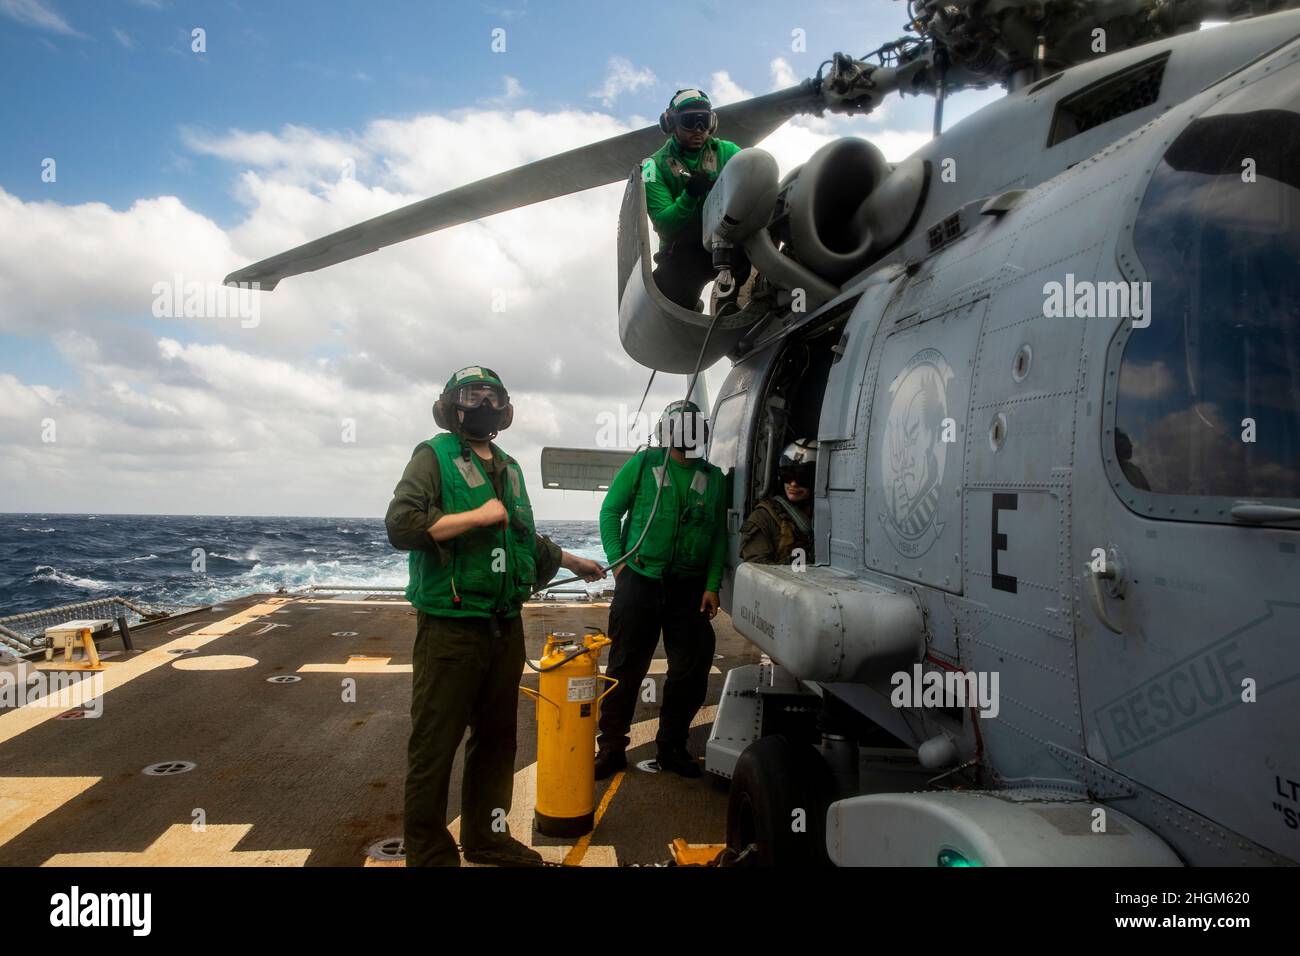 SOUTH CHINA SEA (Jan. 18, 2022) Sailors conduct maintenance on an MH-60R helicopter aboard Arleigh Burke-class guided-missile destroyer USS Ralph Johnson (DDG 114). Ralph Johnson is assigned to Task Force 71/Destroyer Squadron (DESRON) 15, the Navy’s largest forward-deployed DESRON and the U.S. 7th fleet’s principal surface force. (U.S. Navy photo by Mass Communication Specialist 2nd Class Samantha Oblander) Stock Photo